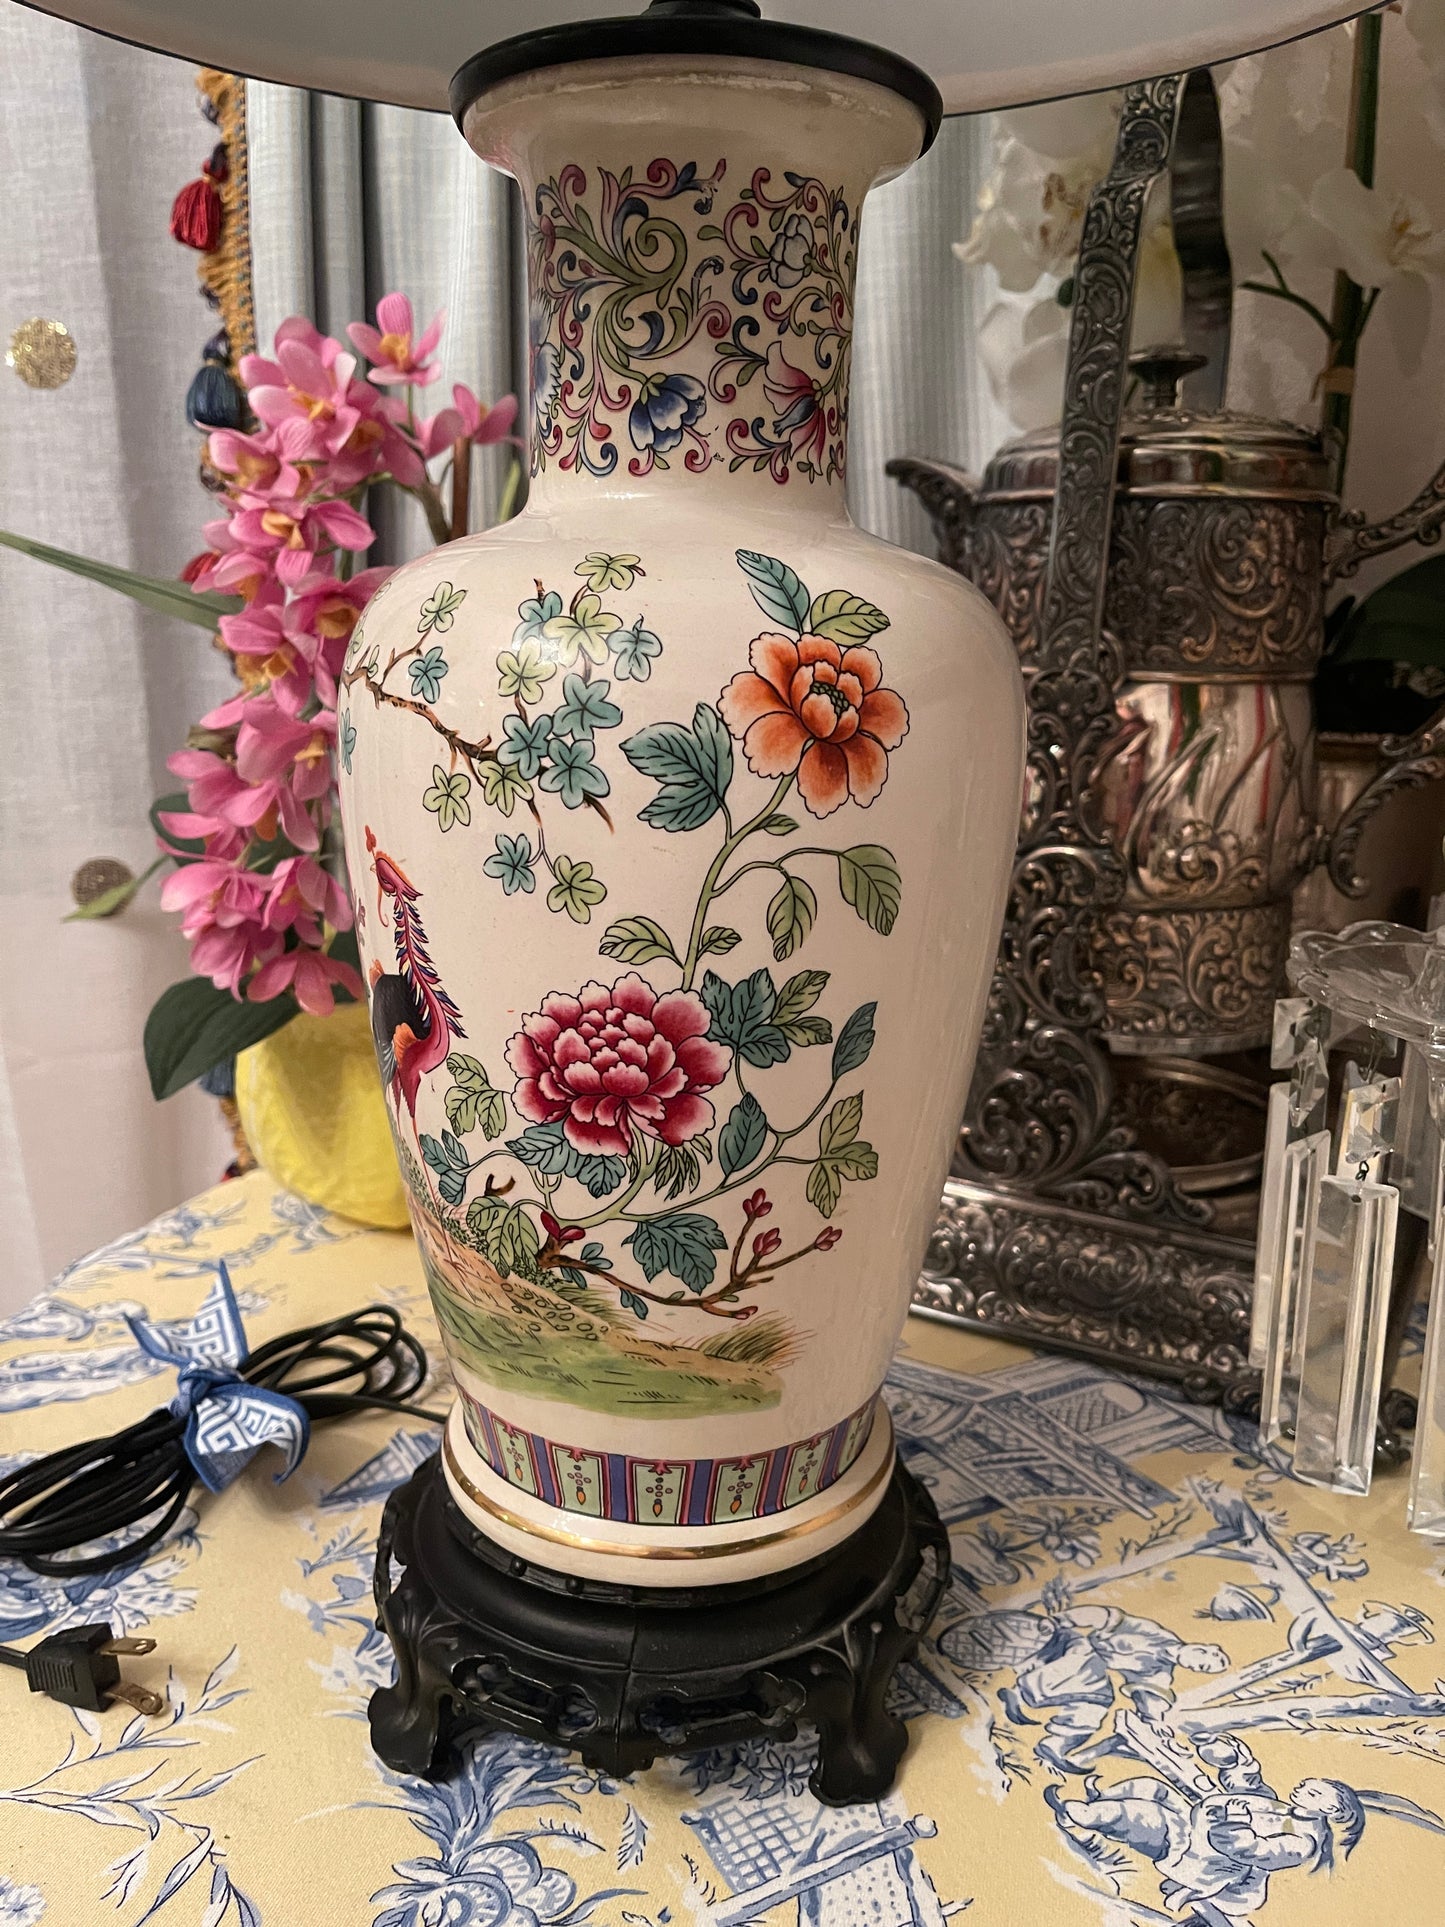 Vibrant Chinoiserie Lamp, Double Phoenix and Floral Chinoiserie Design, Ornate Metal Base